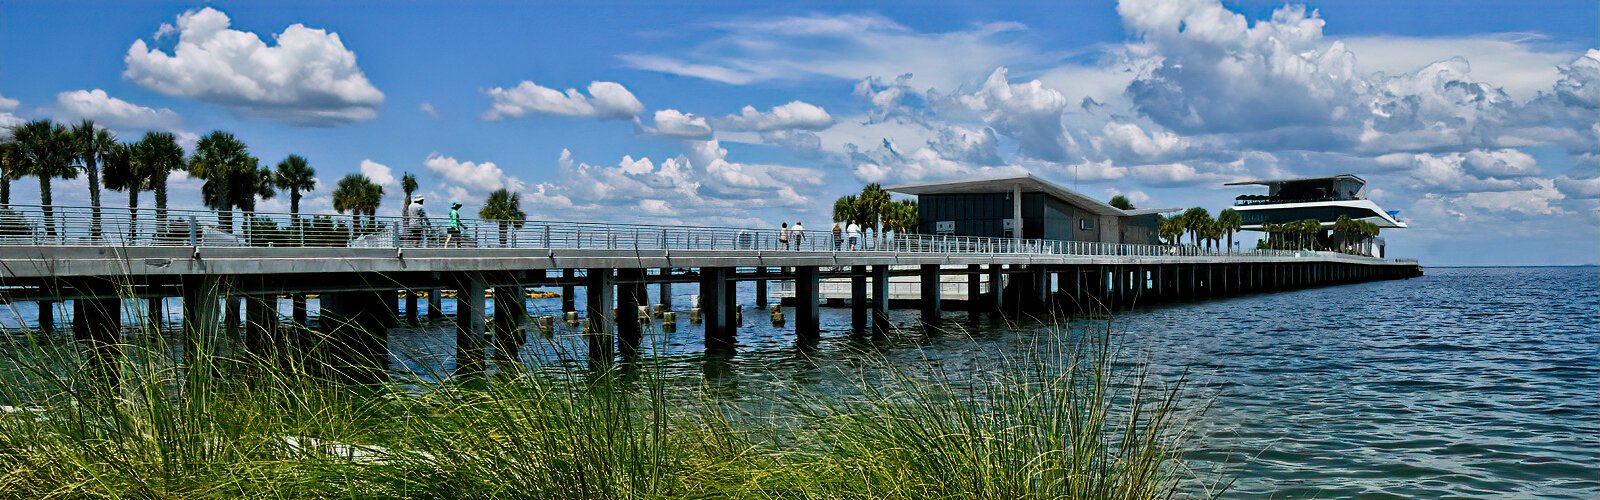 The St. Pete Pier was recently honored as one of 10 winners of the Urban Land Institute’s 2022 Americas Awards for Excellence. The Pier was recognized in the urban open space category.